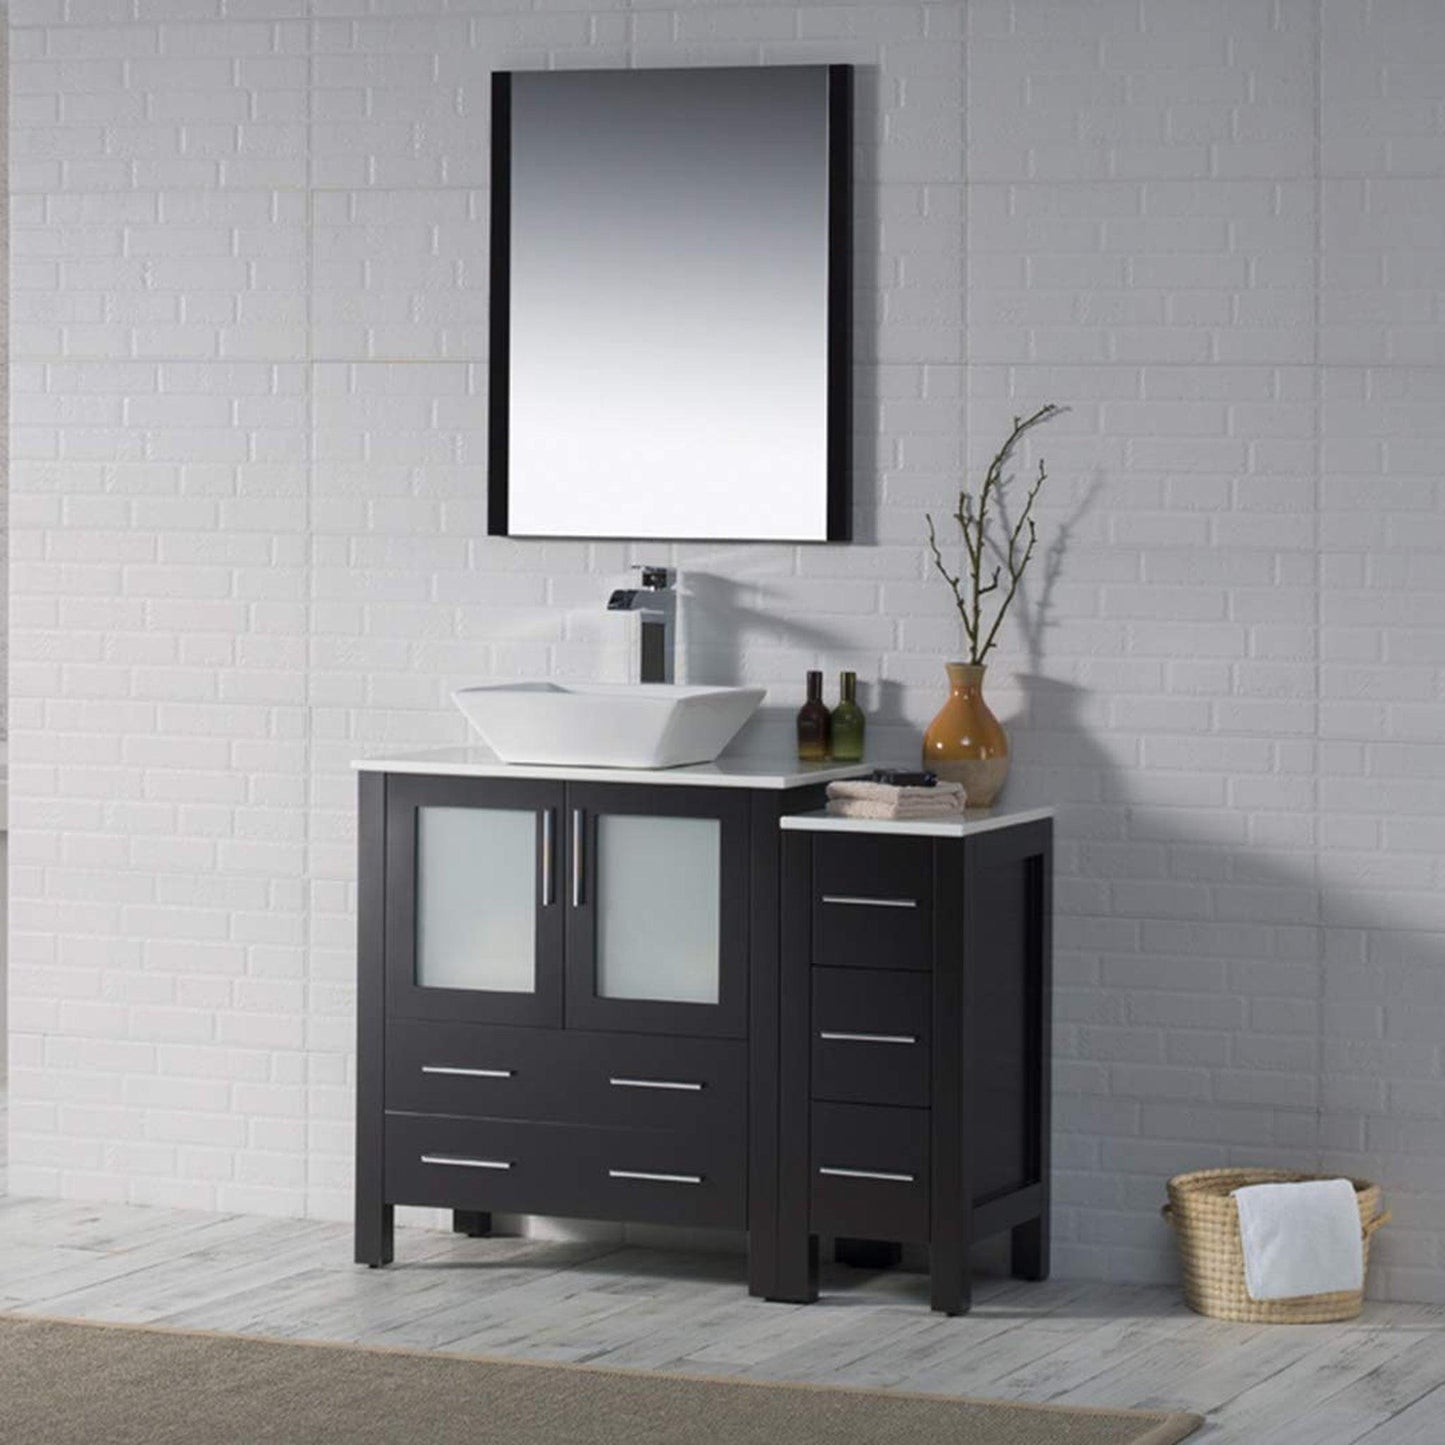 Blossom Sydney 42" Espresso Freestanding Vanity Set With Integrated Single Sink Ceramic Top, Mirror and Side Cabinet